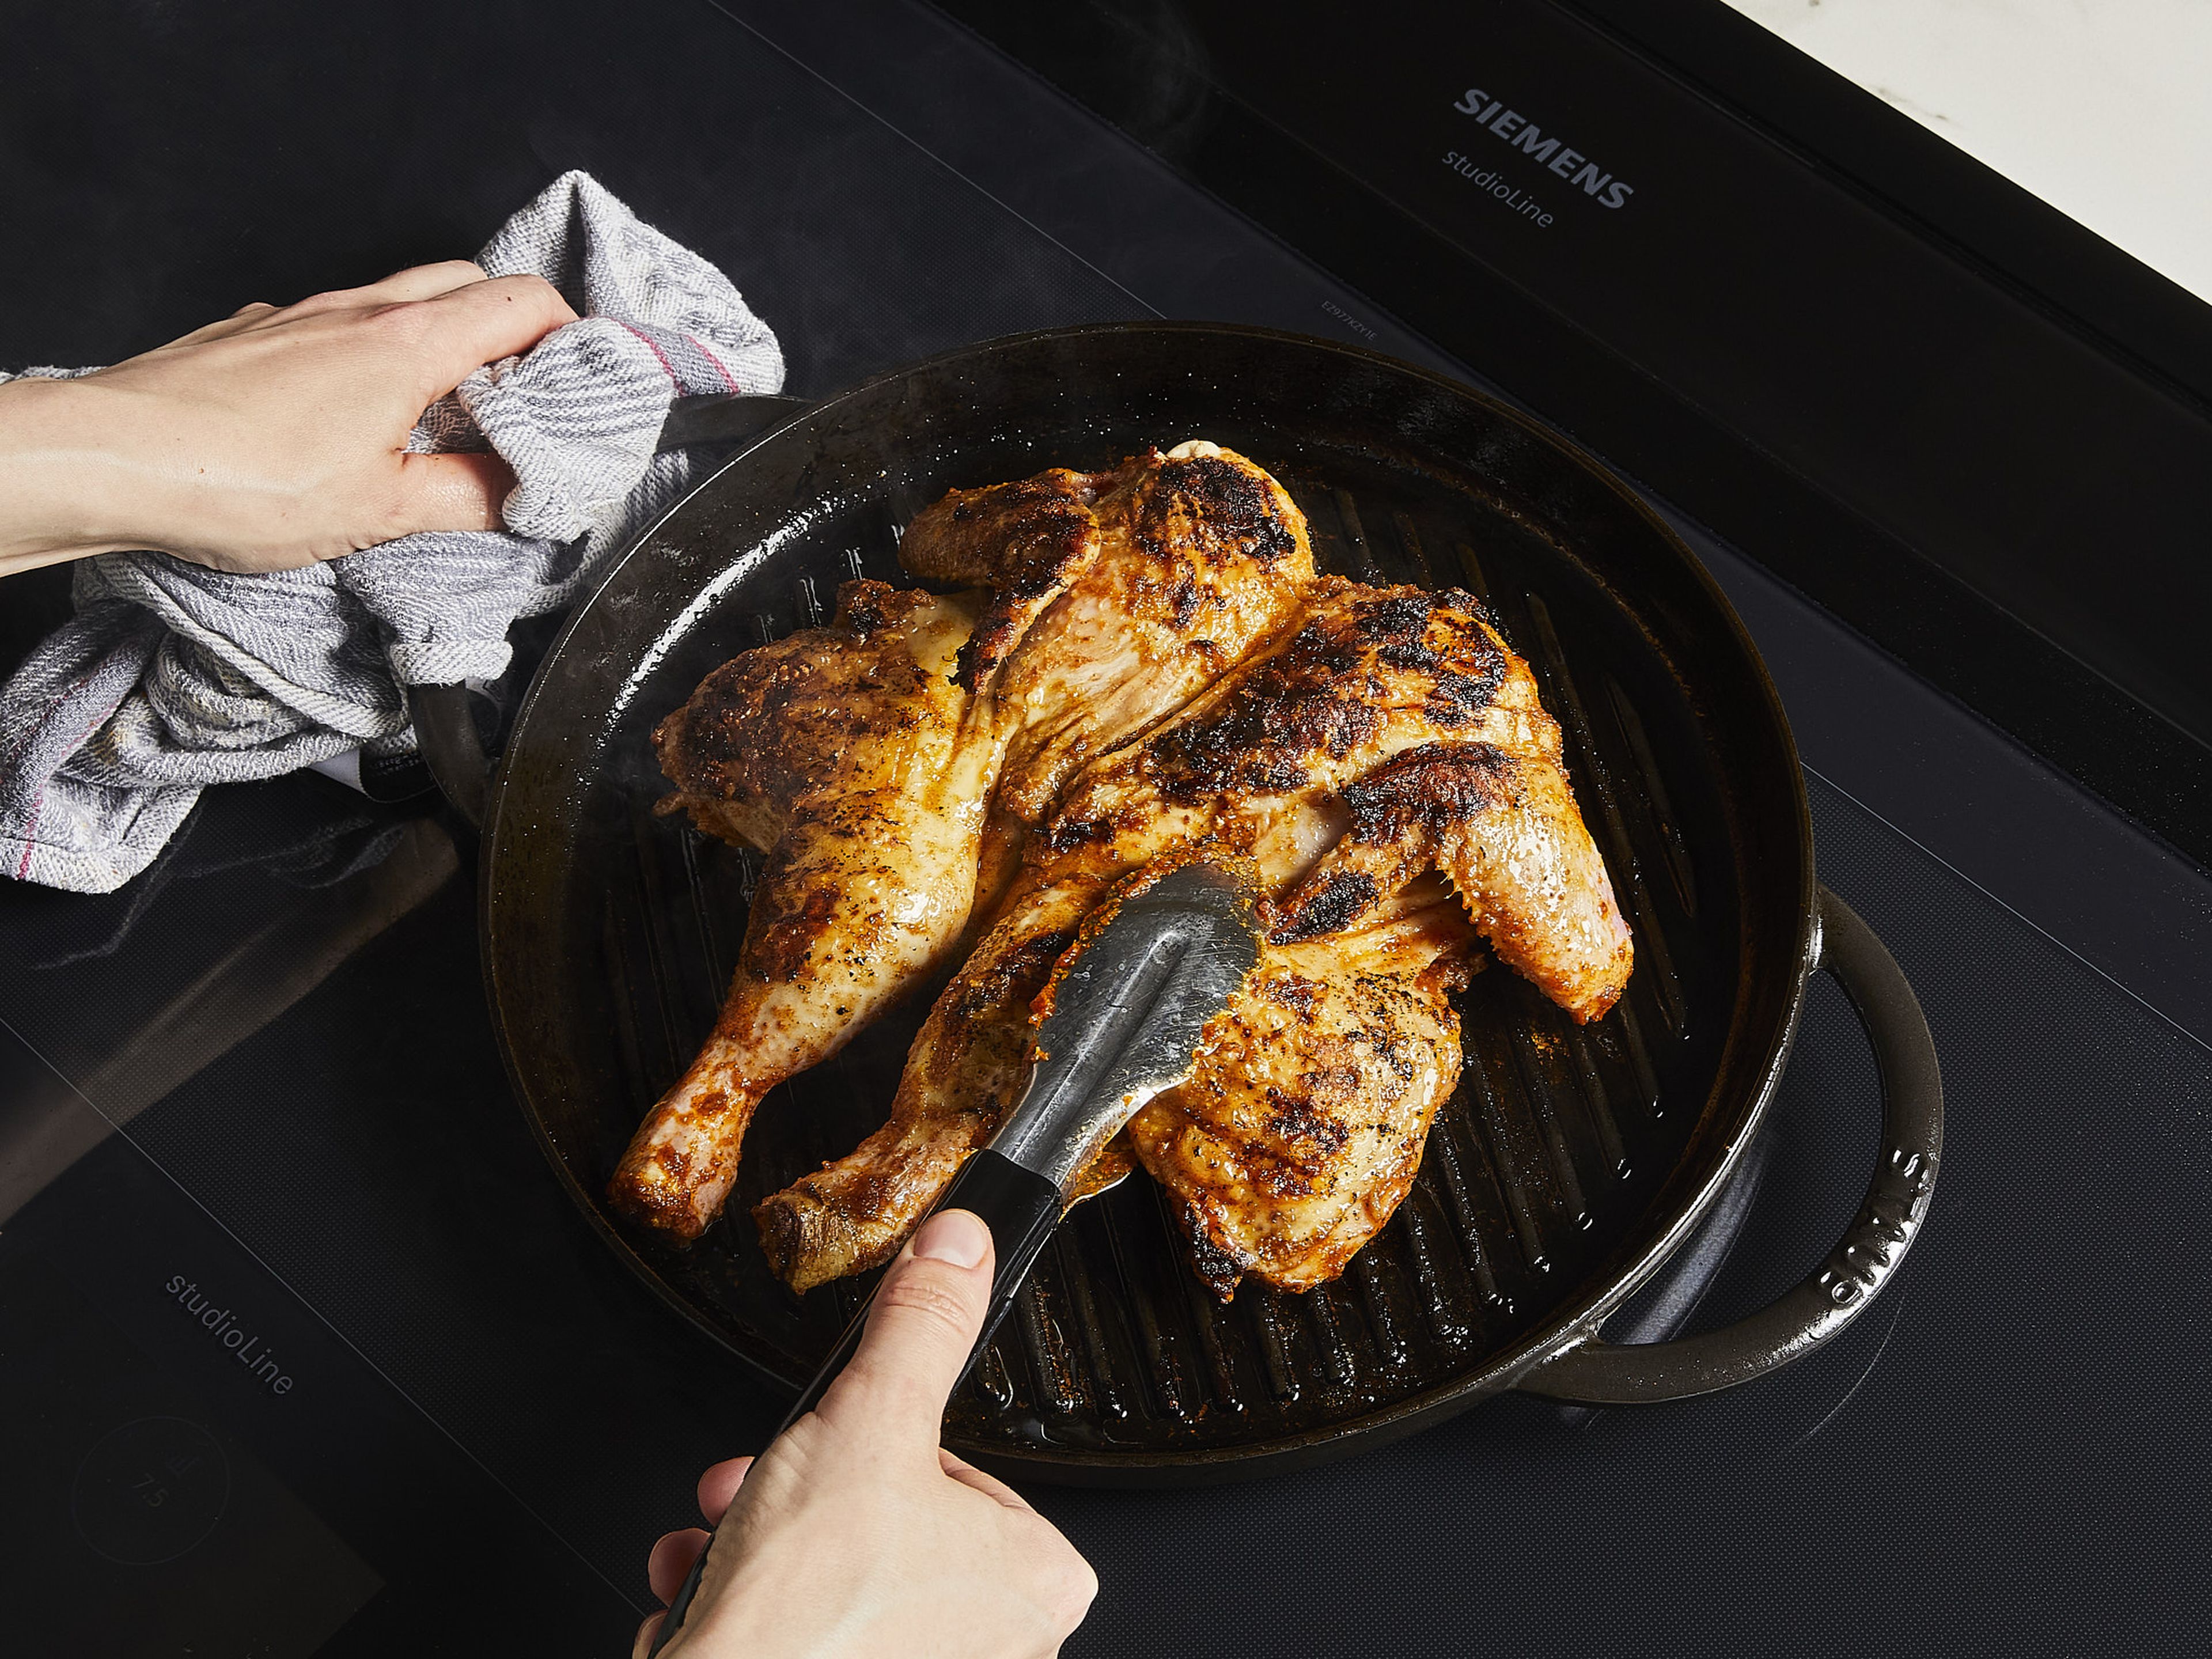 Remove the chicken from the grill or oven and let it rest for approx. 10–15 min. Add salt and pepper to taste and serve with lemon wedges.